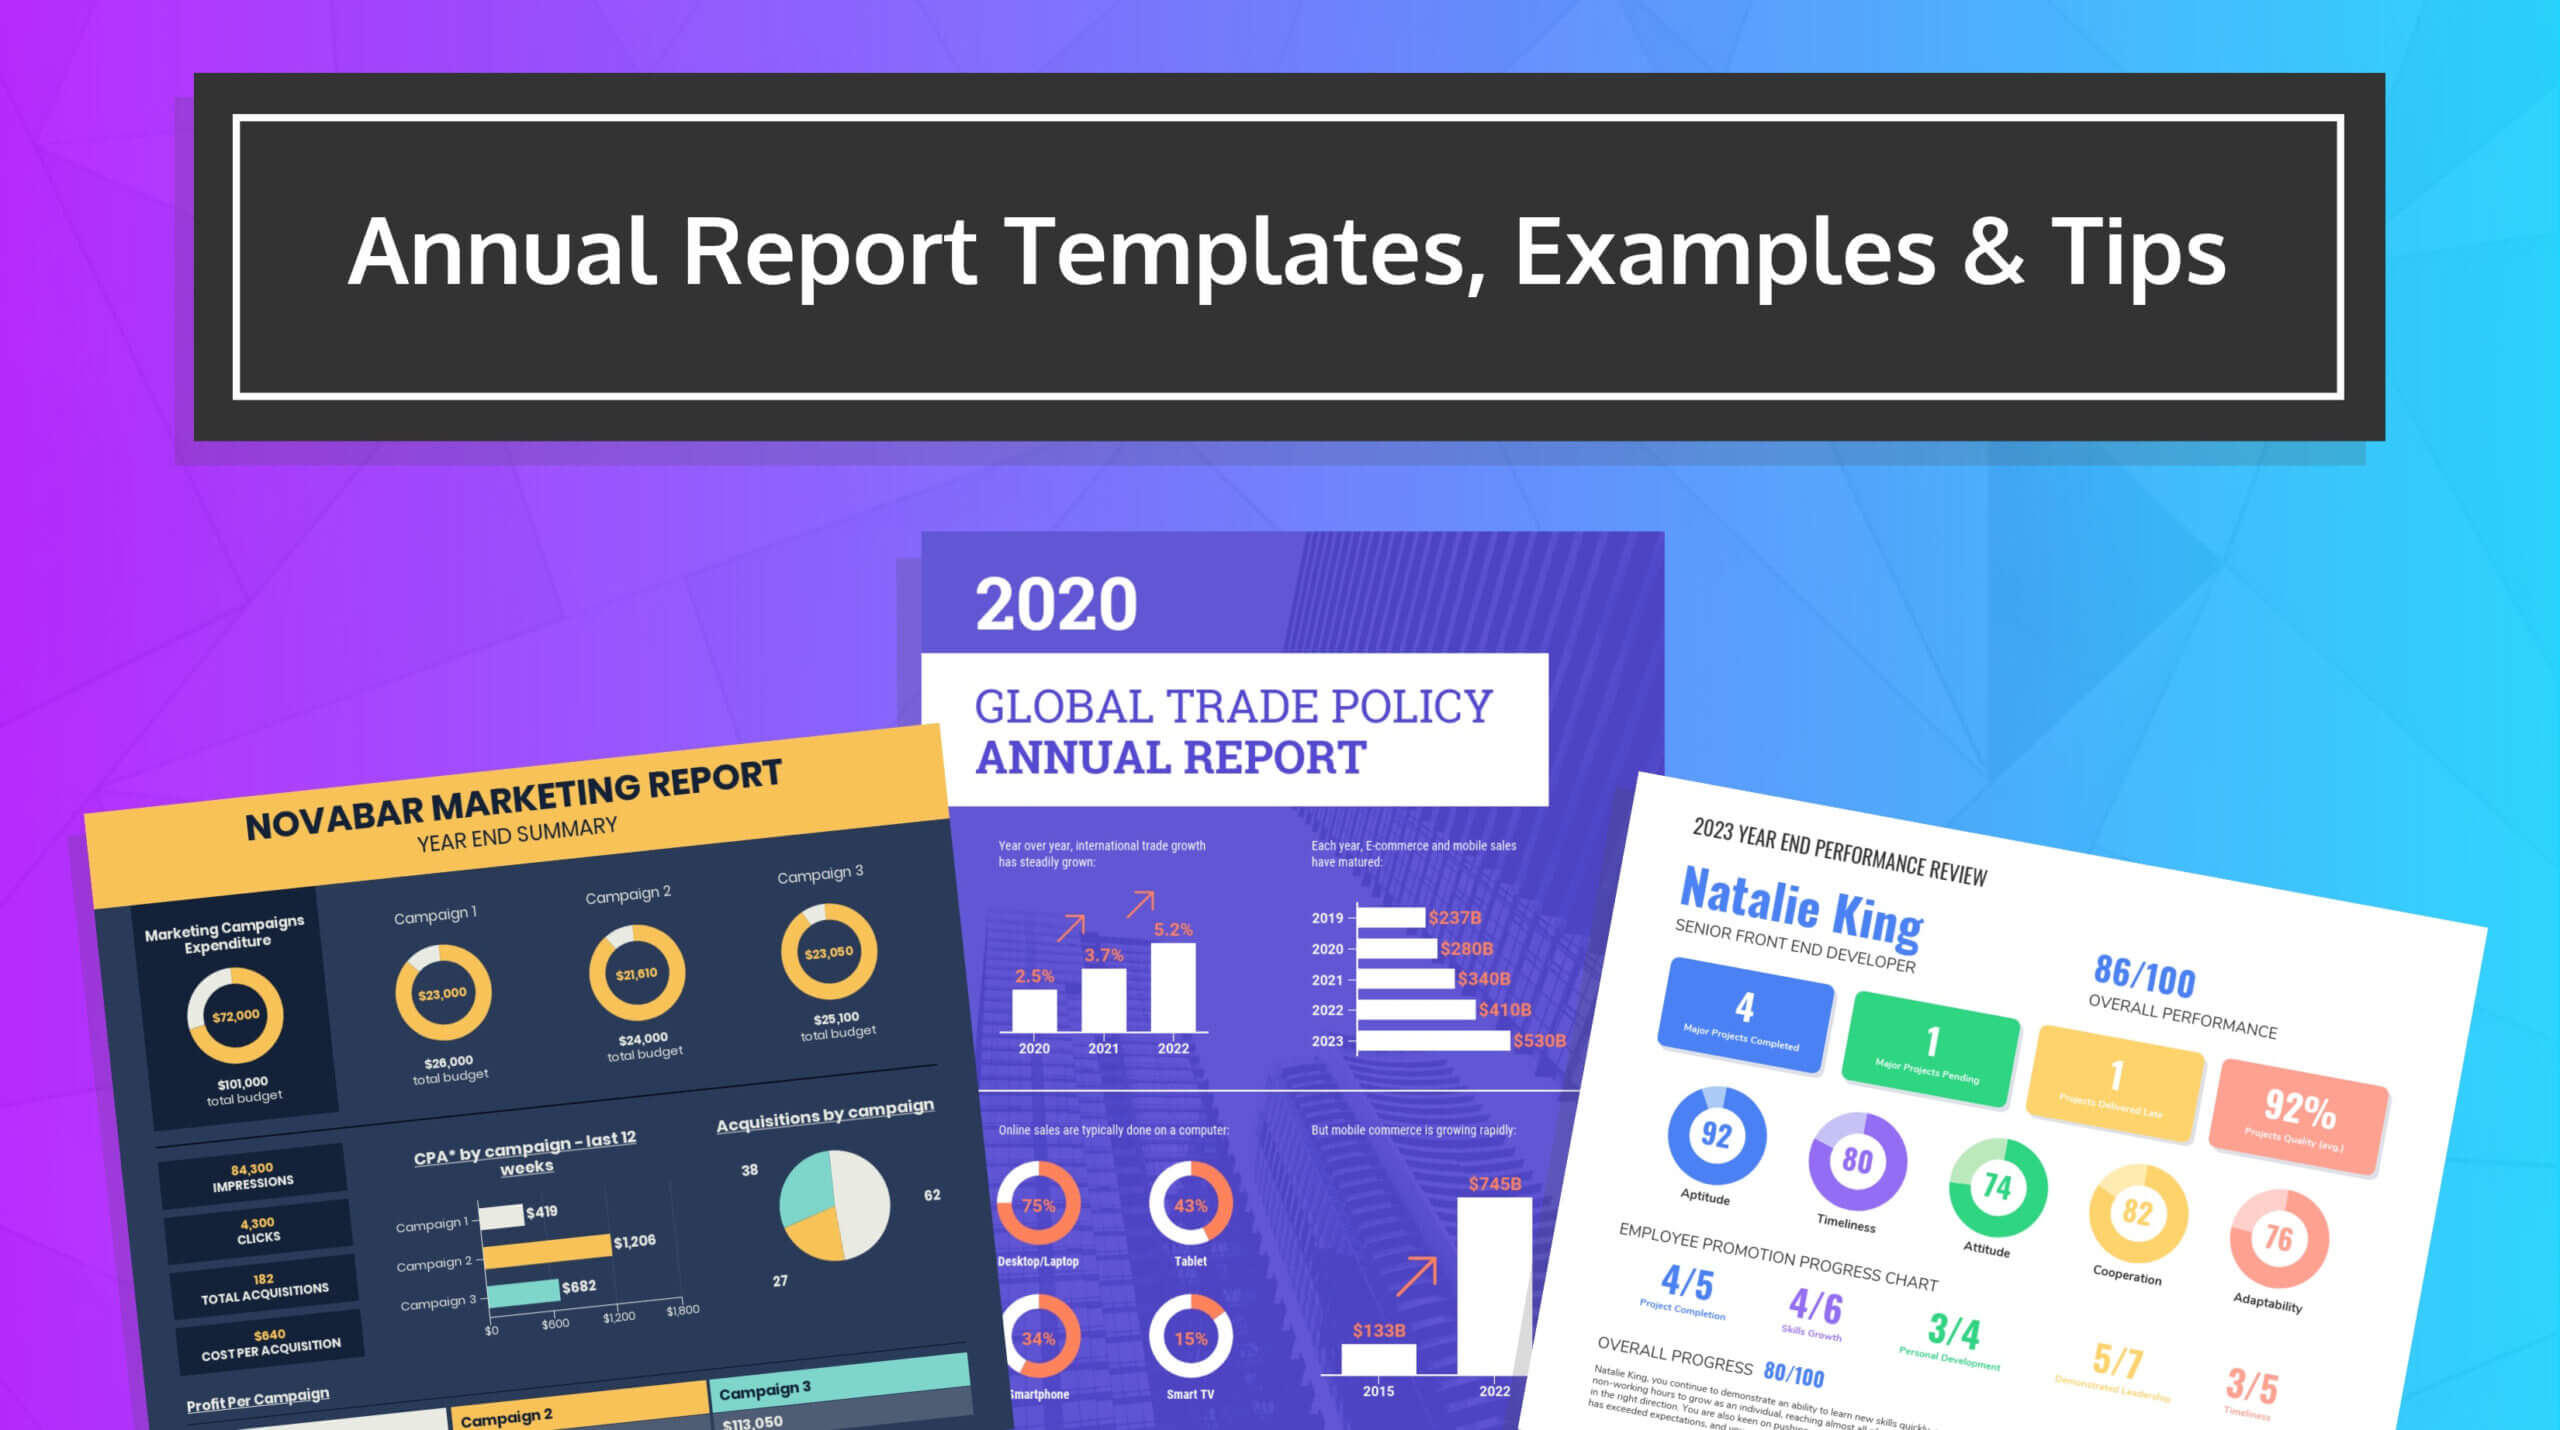 55-customizable-annual-report-design-templates-examples-tips